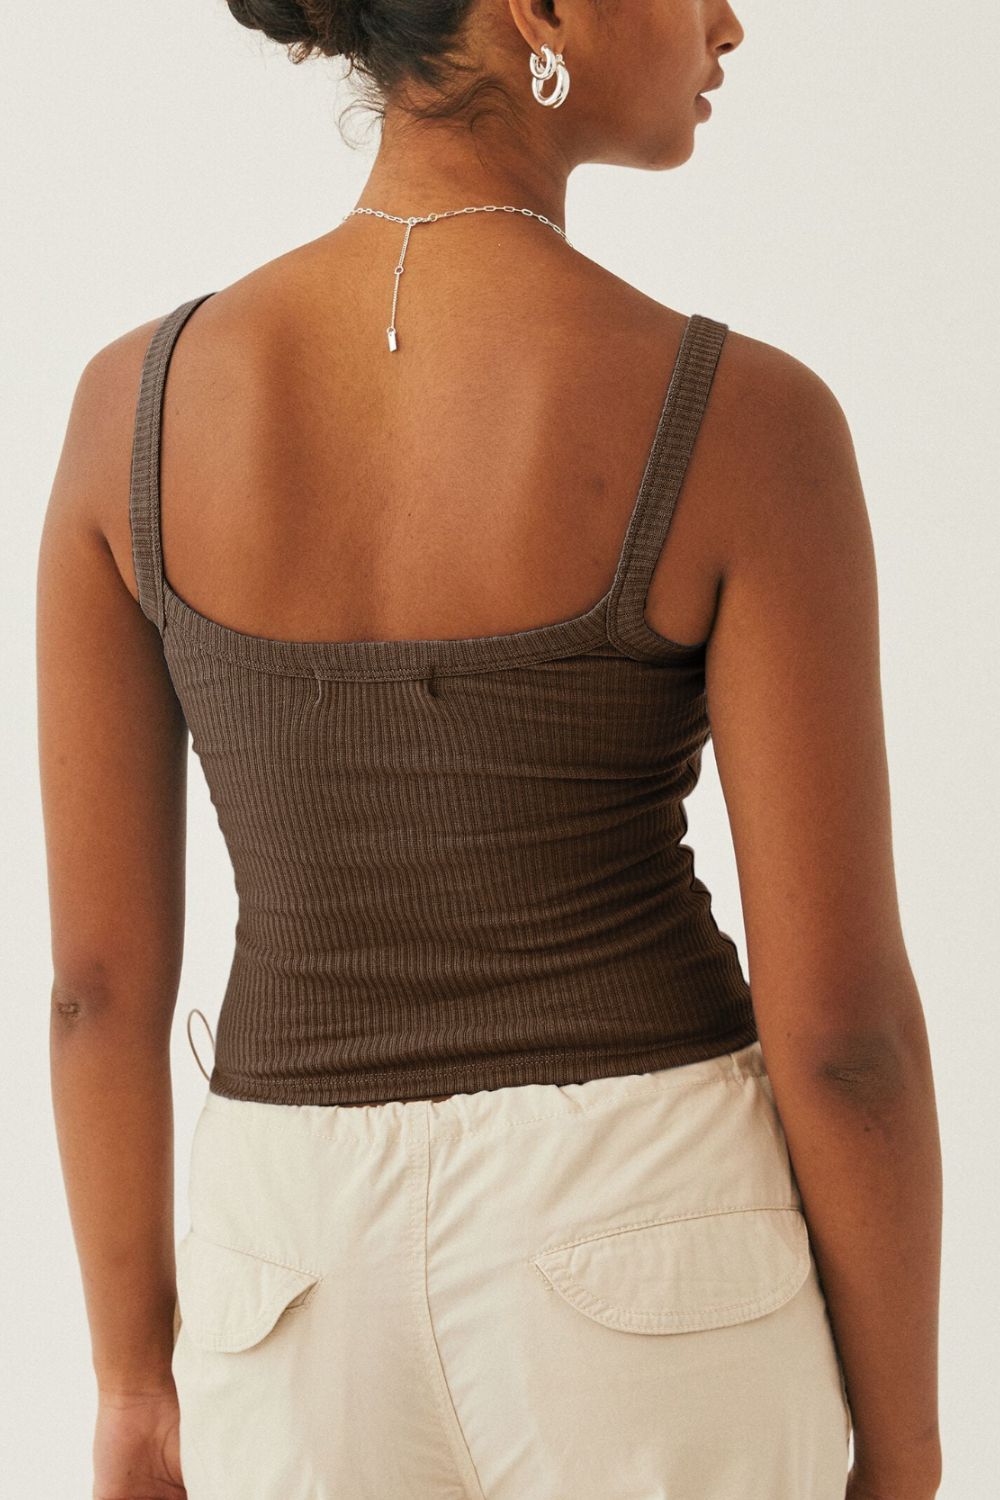 In Your Dreams Ribbed Cropped Cami - Women’s Clothing & Accessories - Shirts & Tops - 14 - 2024